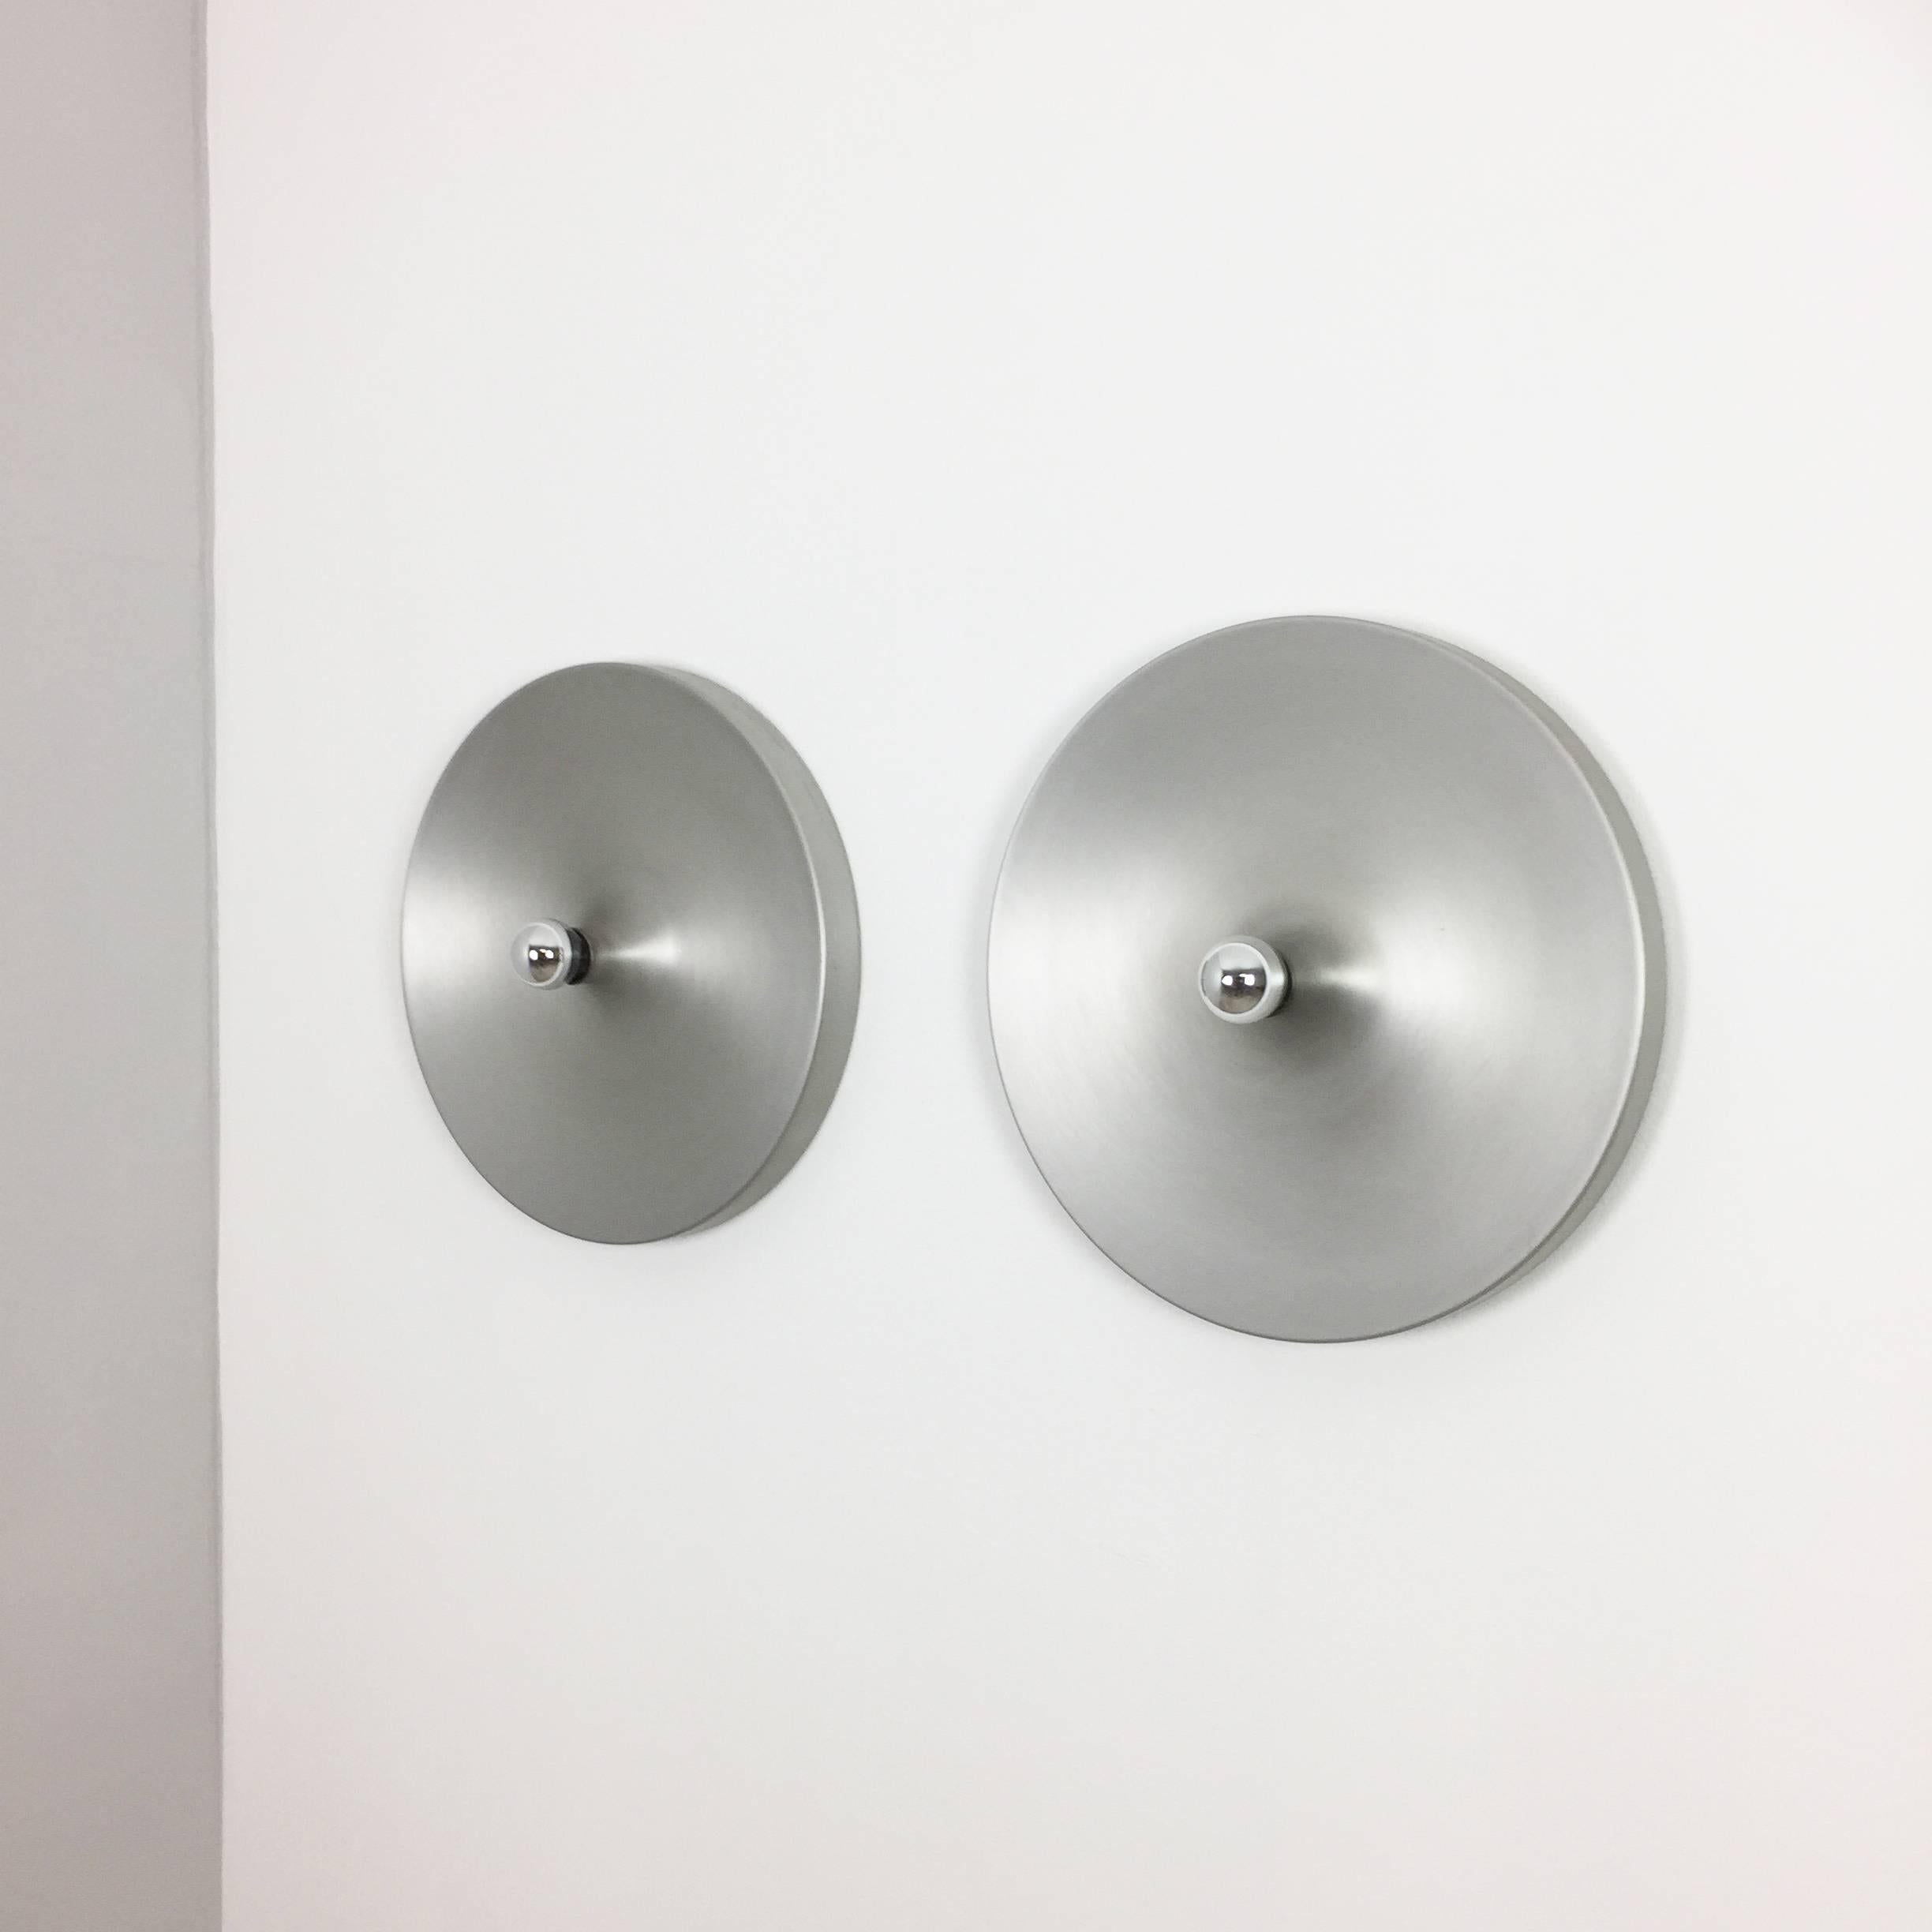 Rticle:

Extra large wall light sconce set of two


Producer:

Staff Lights



Oriding:

Germany



Age:

1970s



Description:

original 1960s modernist german wall Light made of solid metal. This super rare wall light was